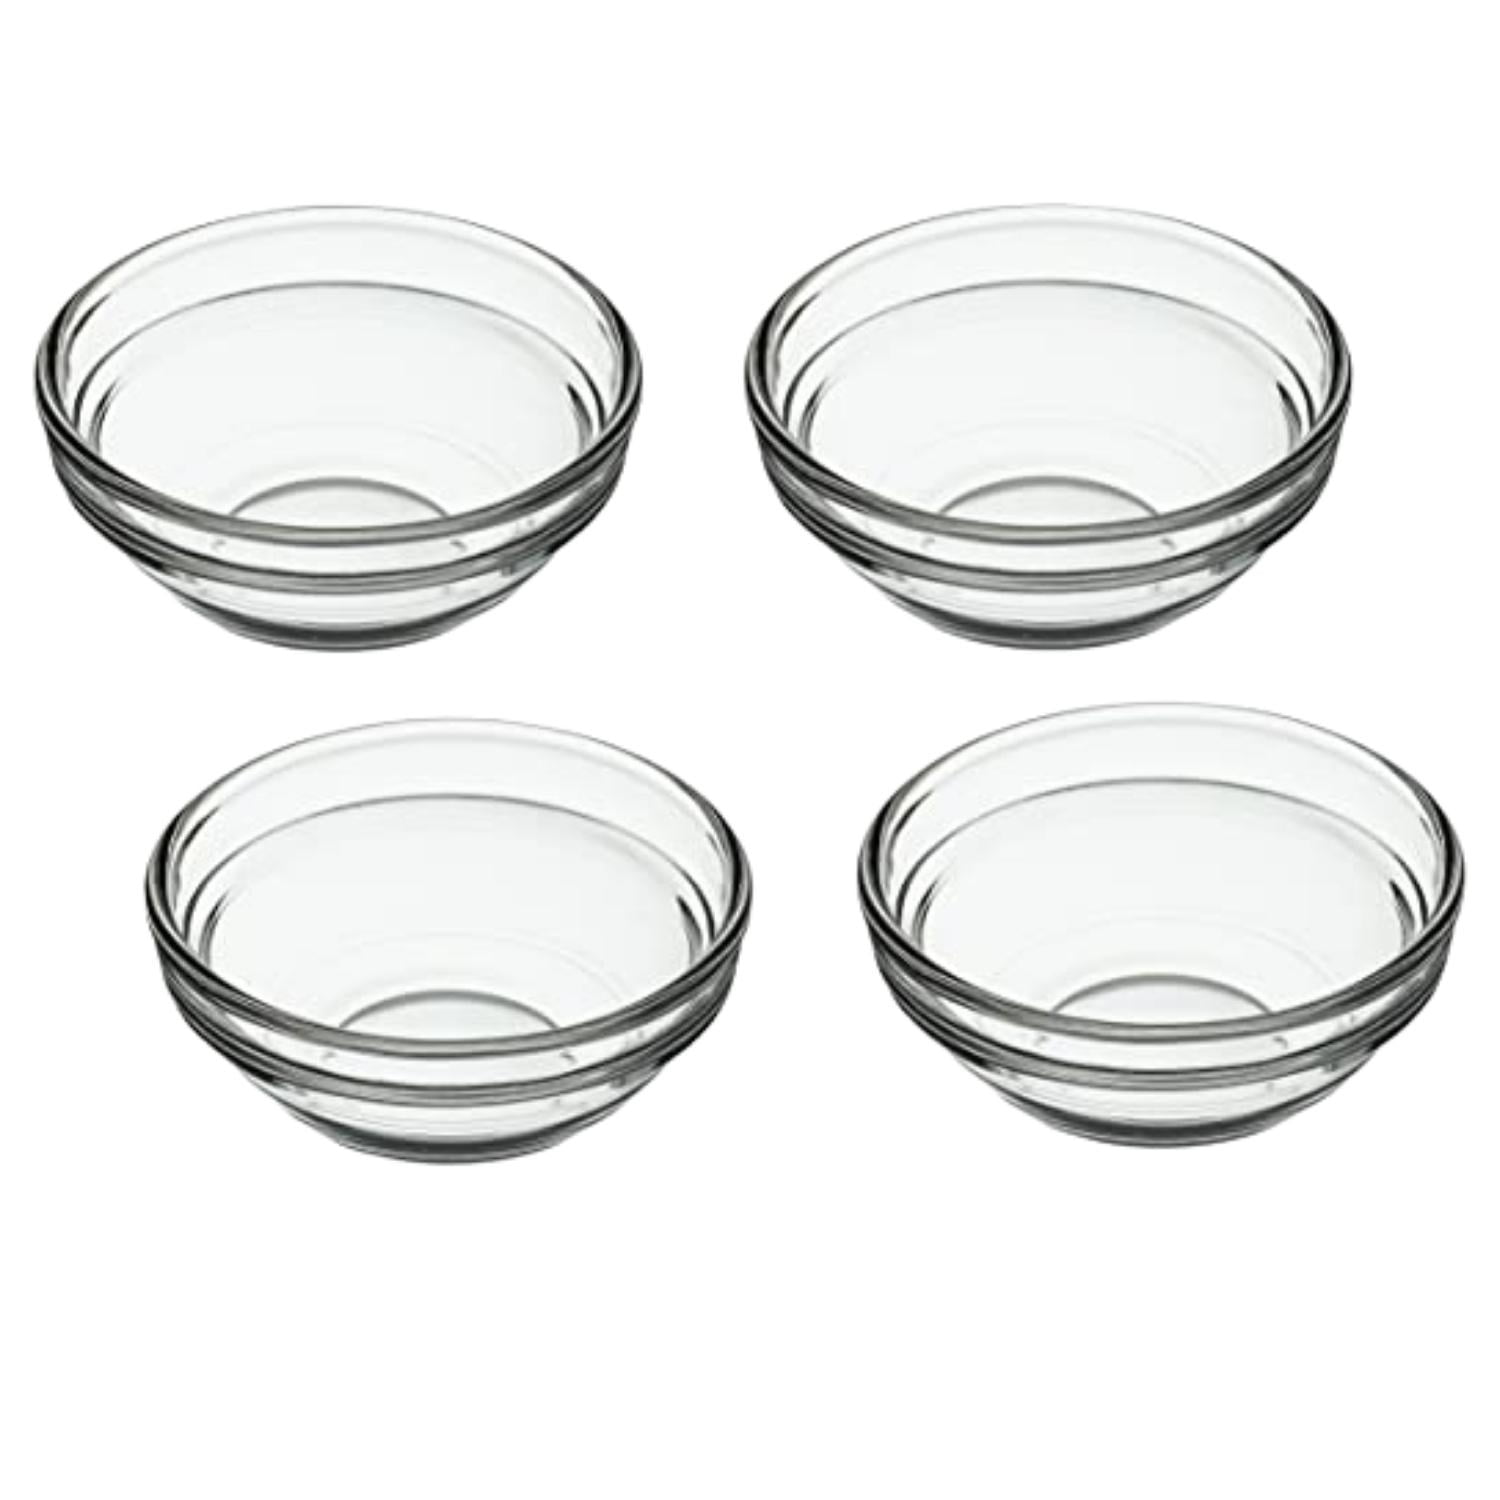 Vikko 3.5 Small Glass Bowls: Clear Bowls - Mise En Place Bowls - Glass  Prep Bowls For Cooking - Sauce, Snack, Dessert & Dip Bowls - Glass Cereal